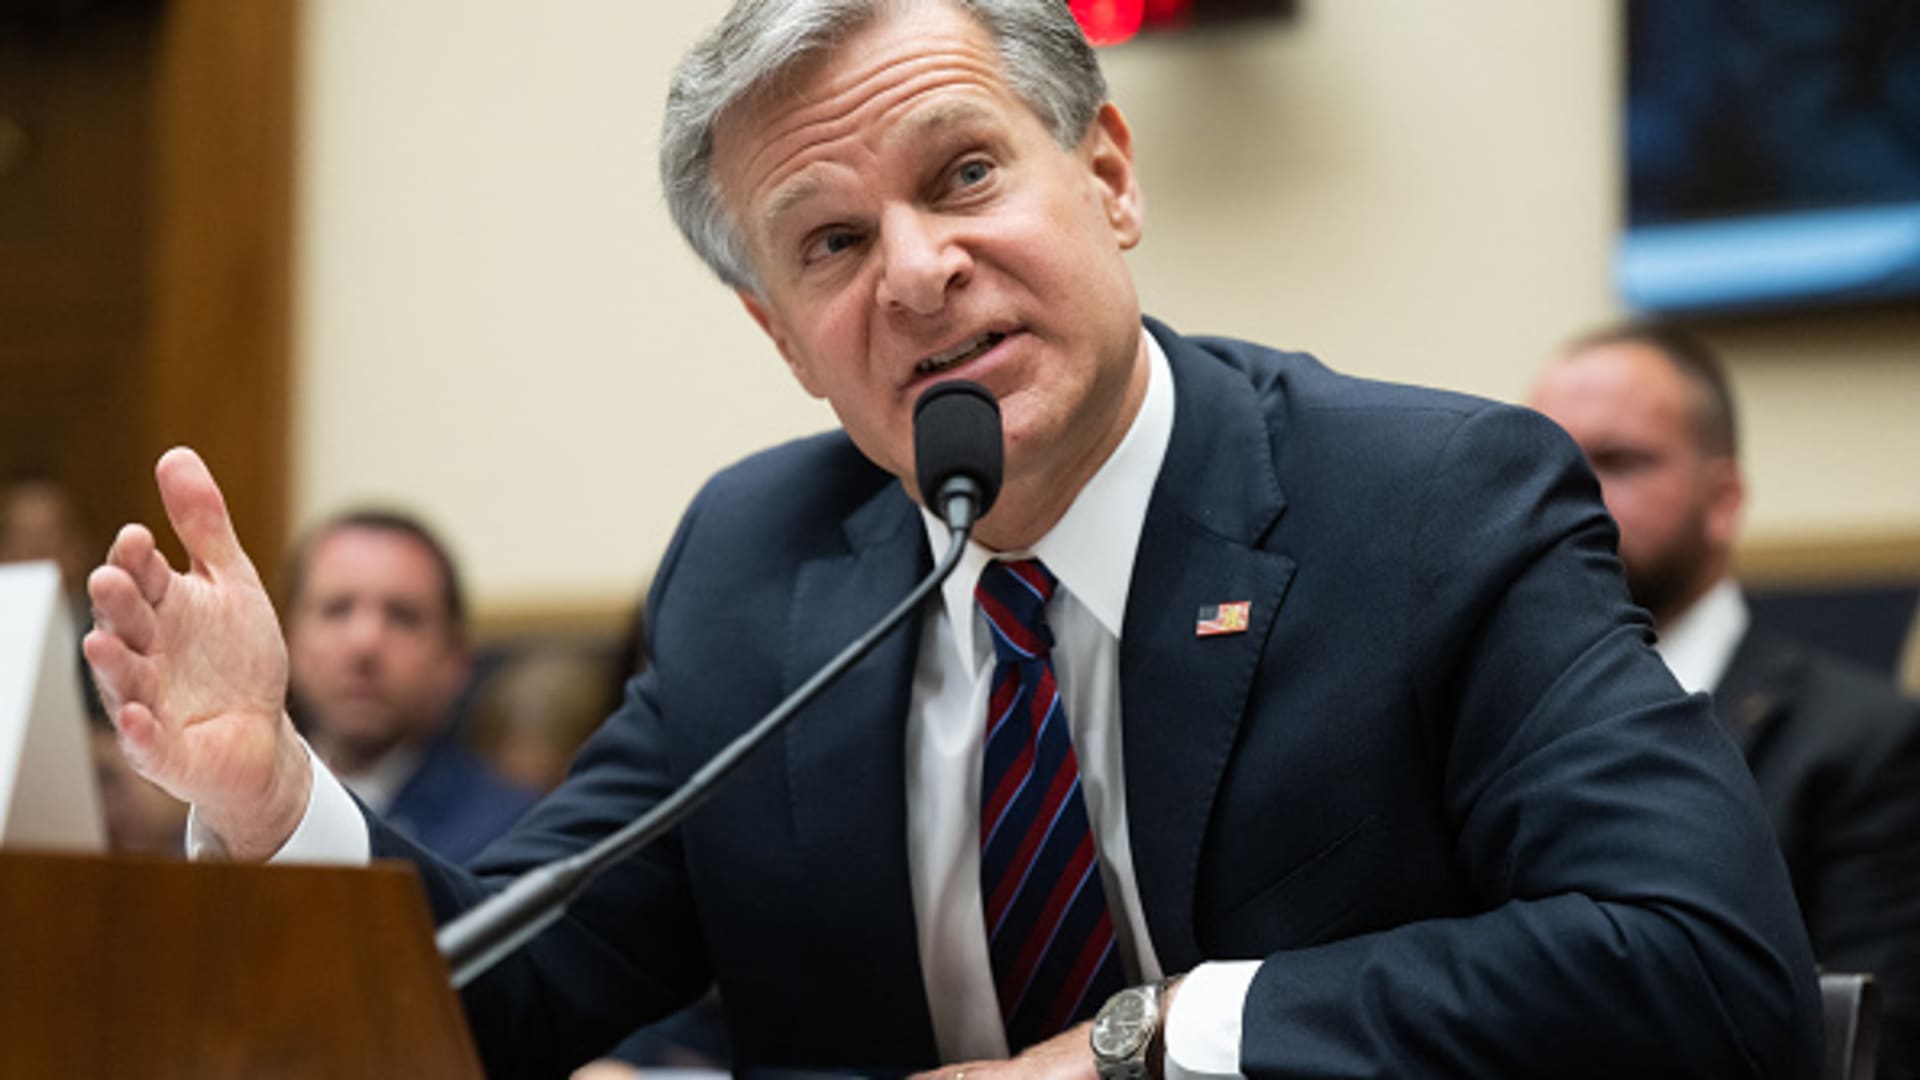 Communist Party cells influencing U.S. firms’ China operations, FBI Director Wray says